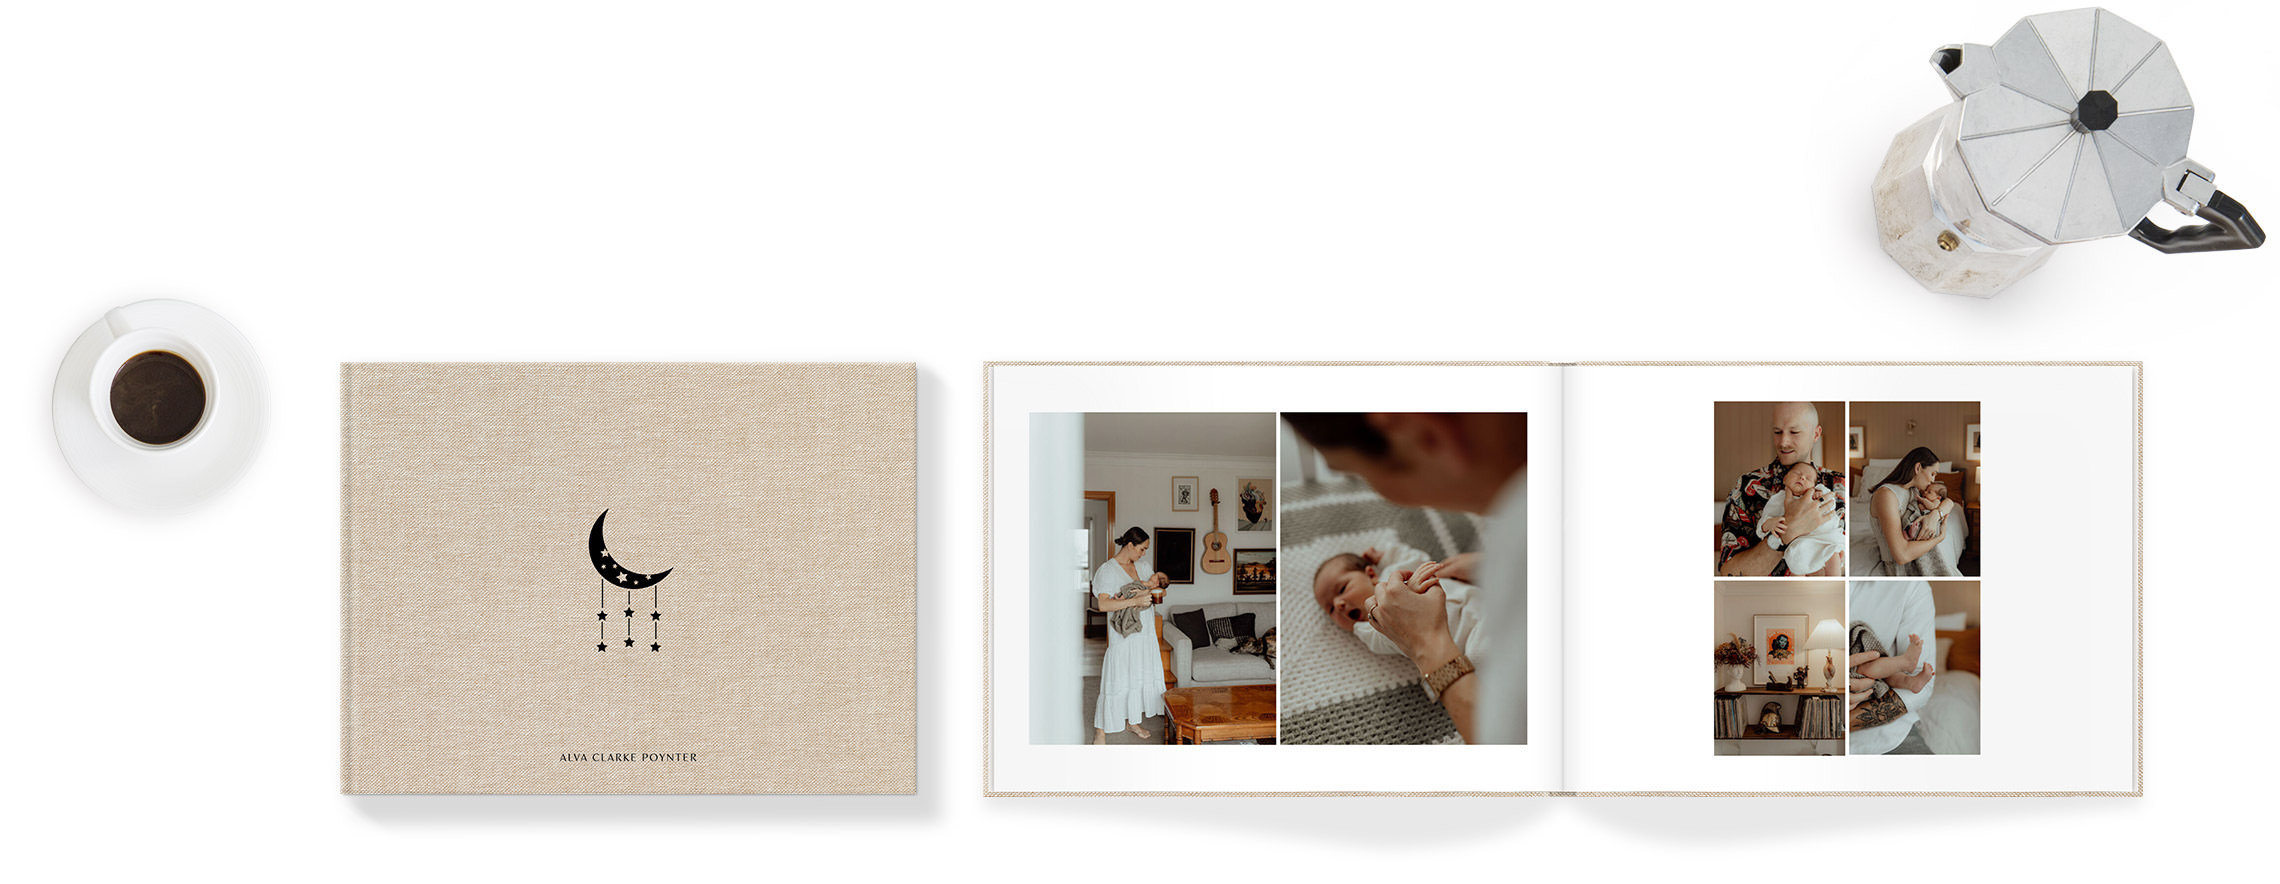 Premium Photo Book with baby imagery